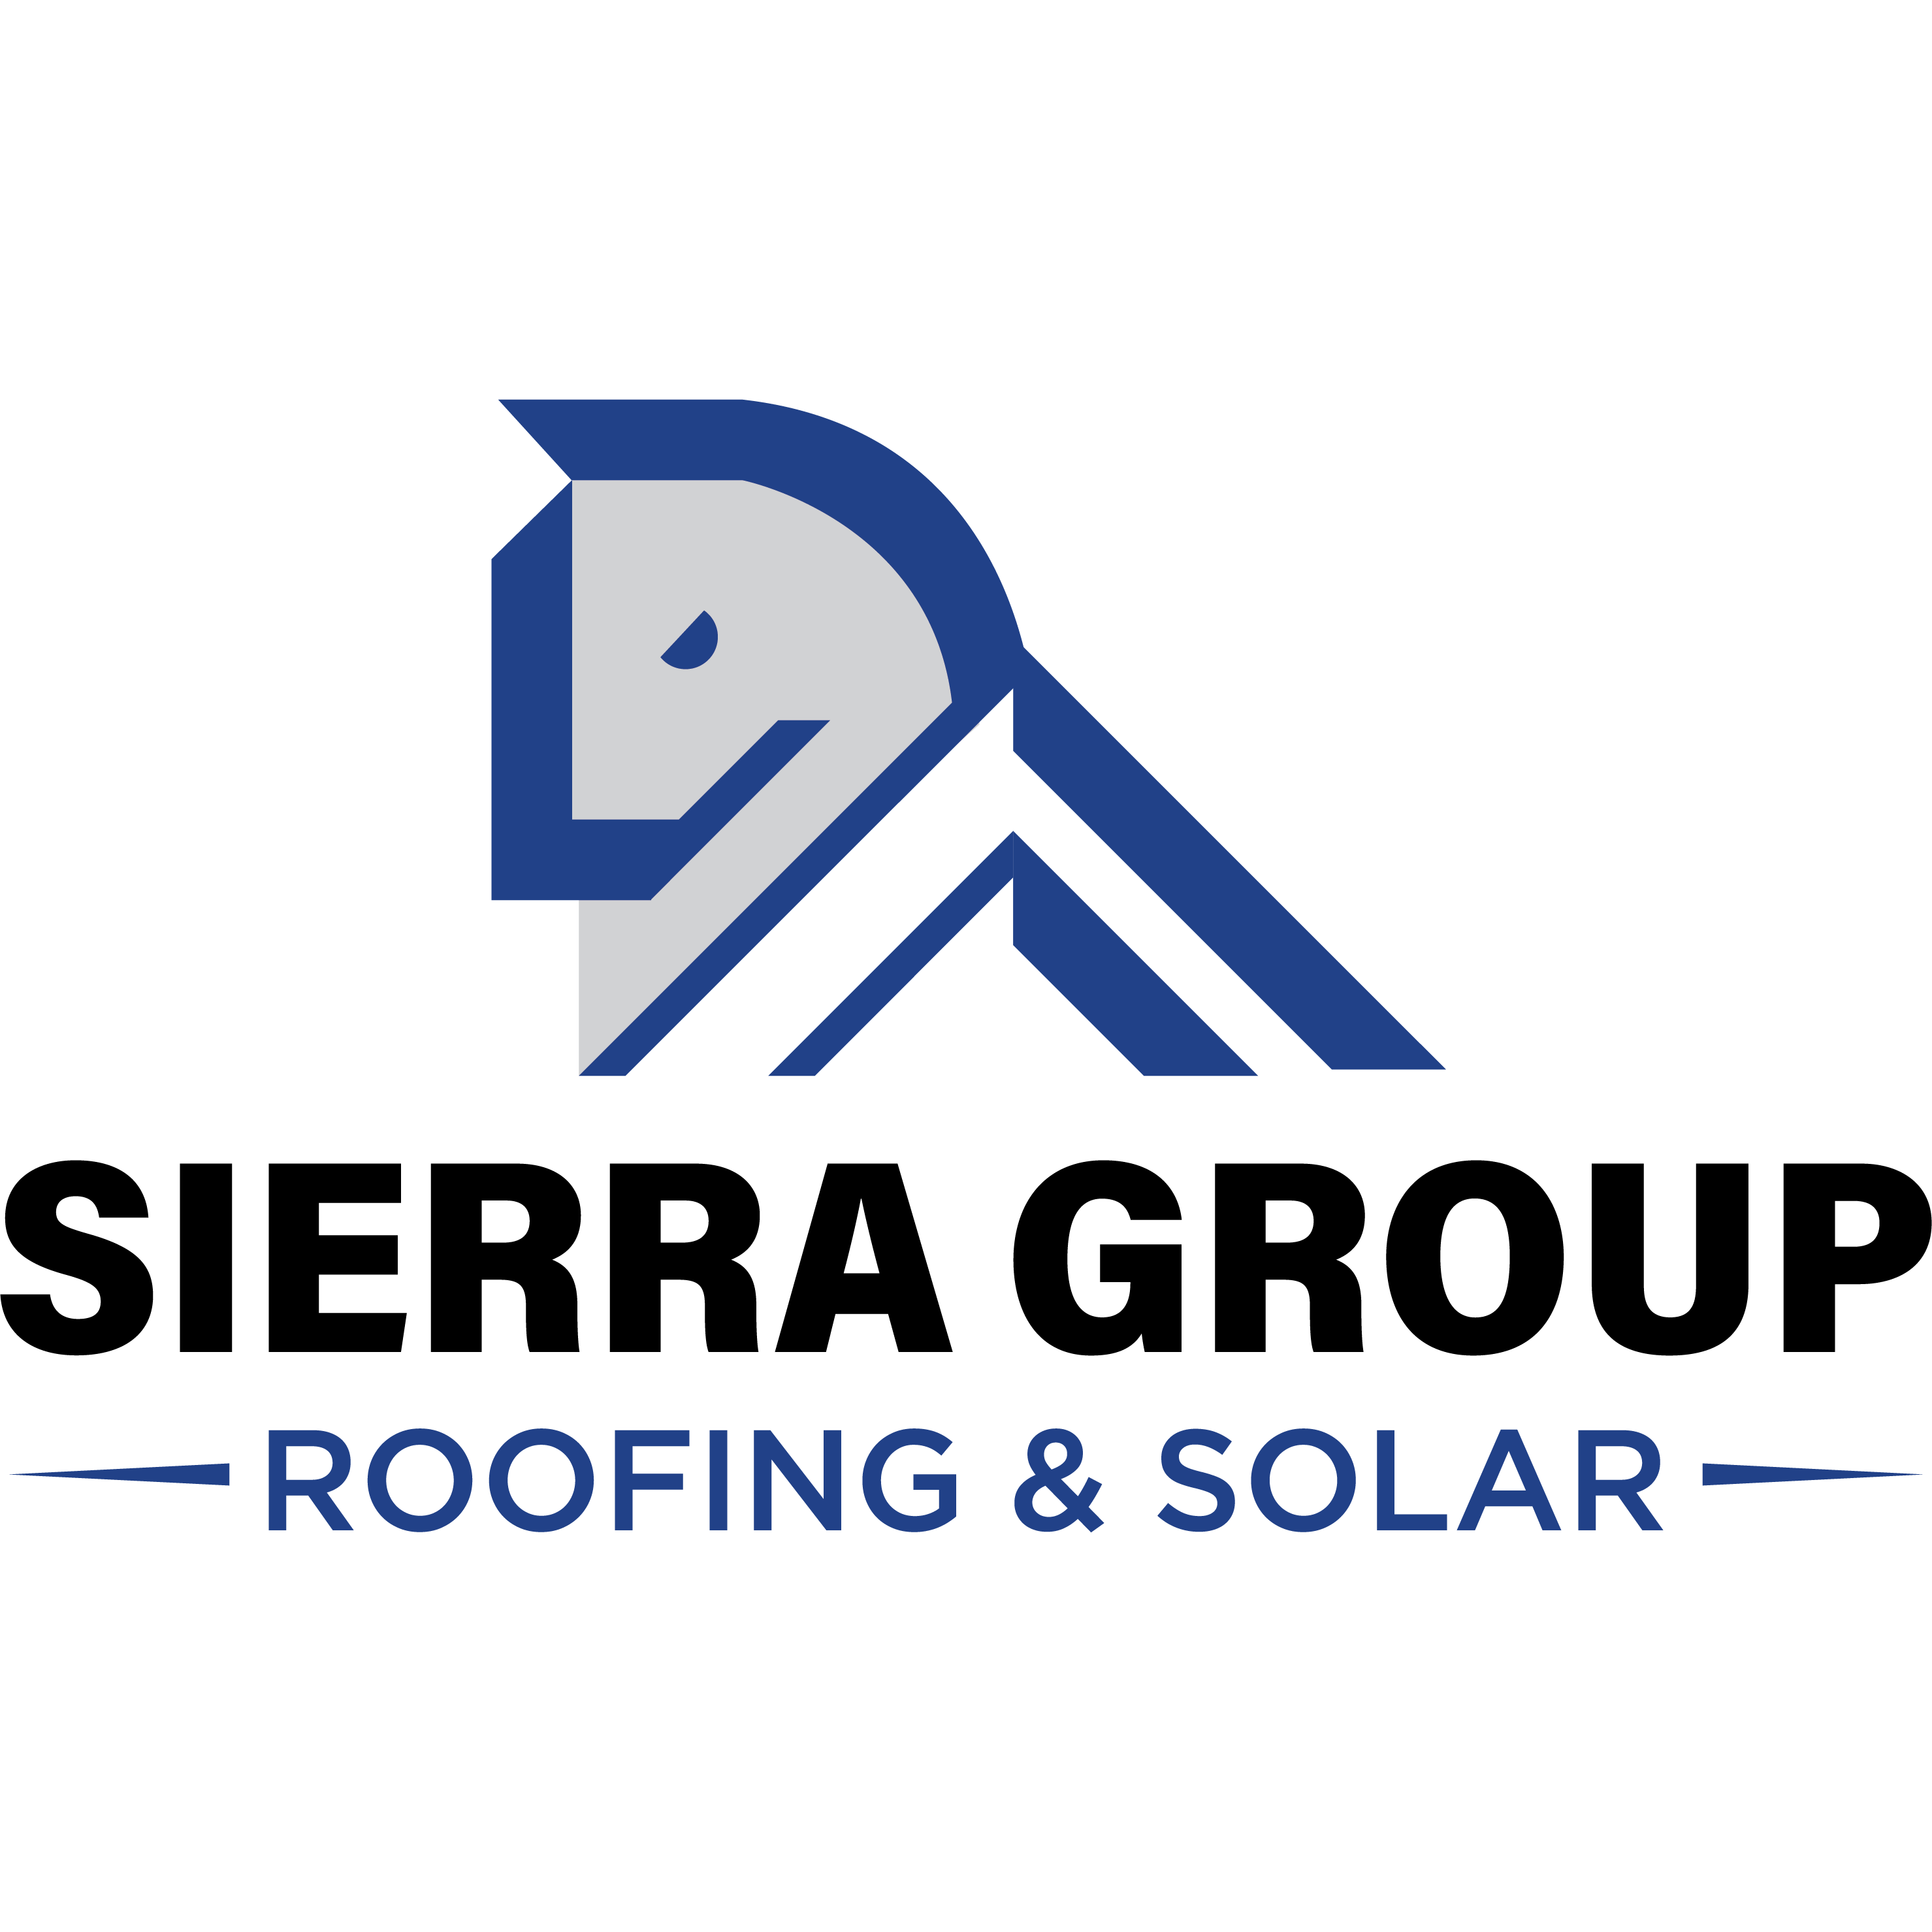 Sierra Group Roofing & Solar - Blytheville, AR 72315 - (870)278-5356 | ShowMeLocal.com